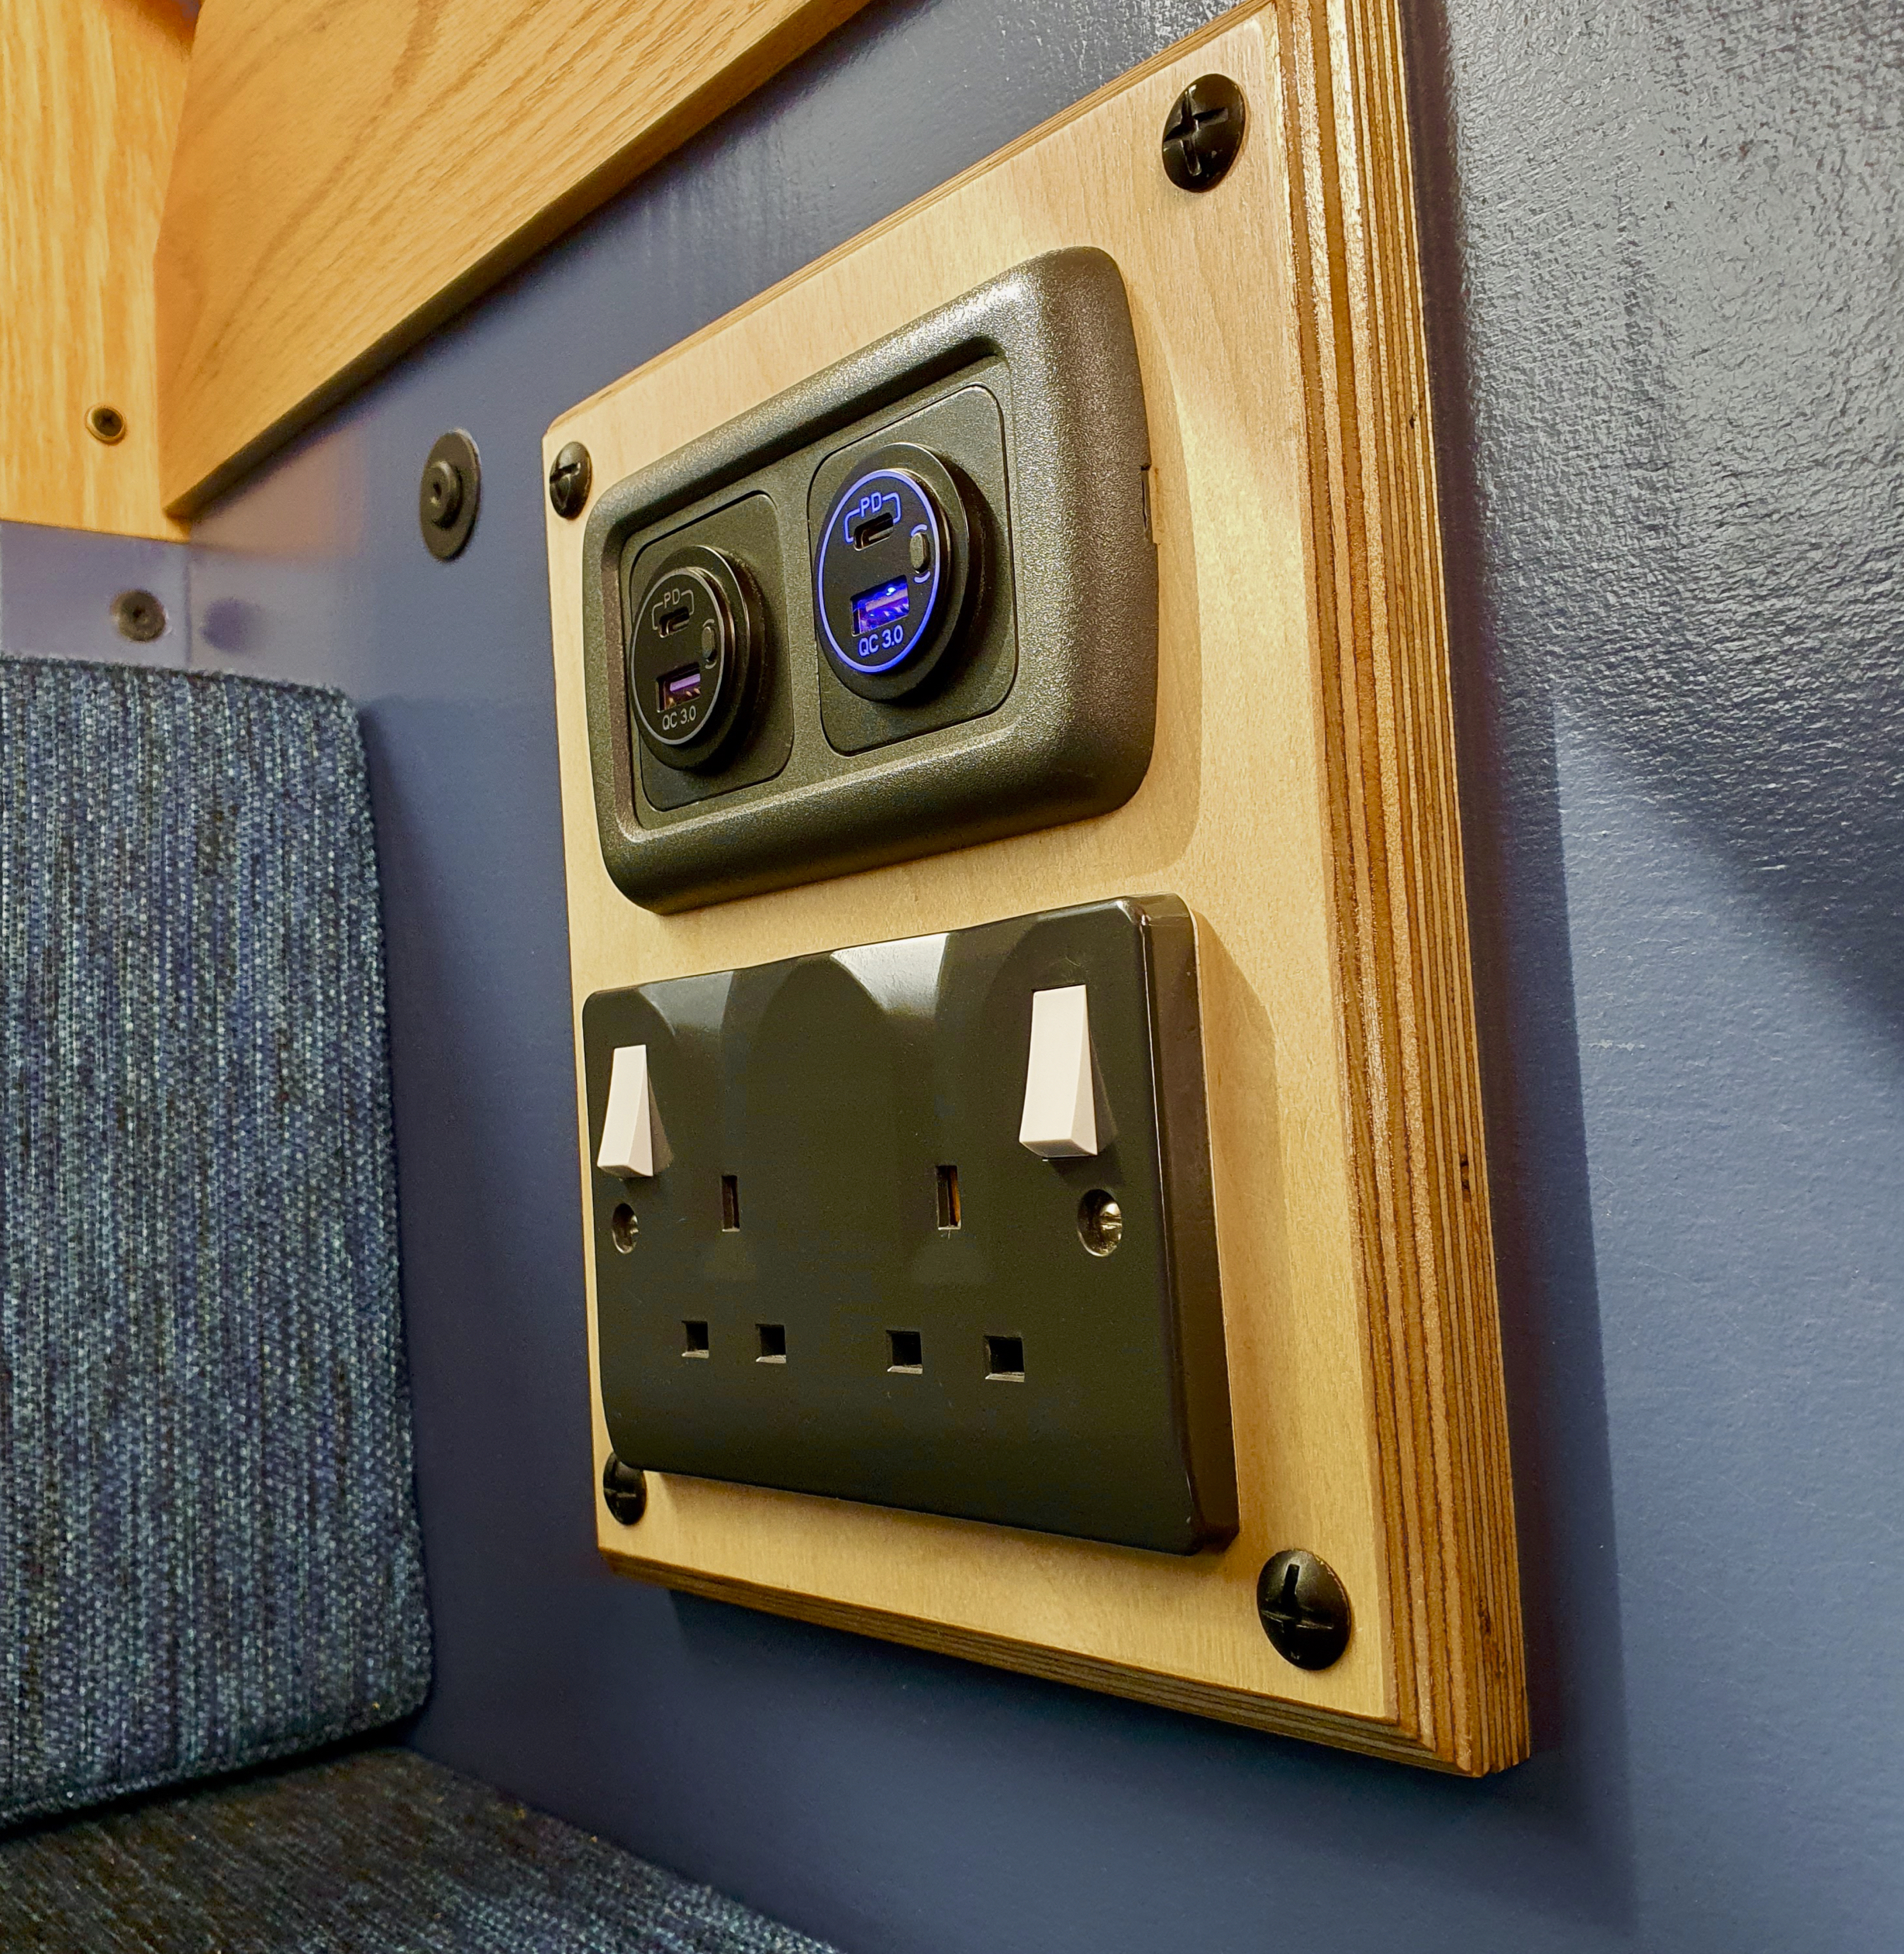 A wooden panel on a wall houses a set of electrical outlets. The top section features two circular USB ports with an illuminated blue display. Below, there is a standard UK double socket with two switches. The wall around the panel is partially covered in blue fabric and painted wood.